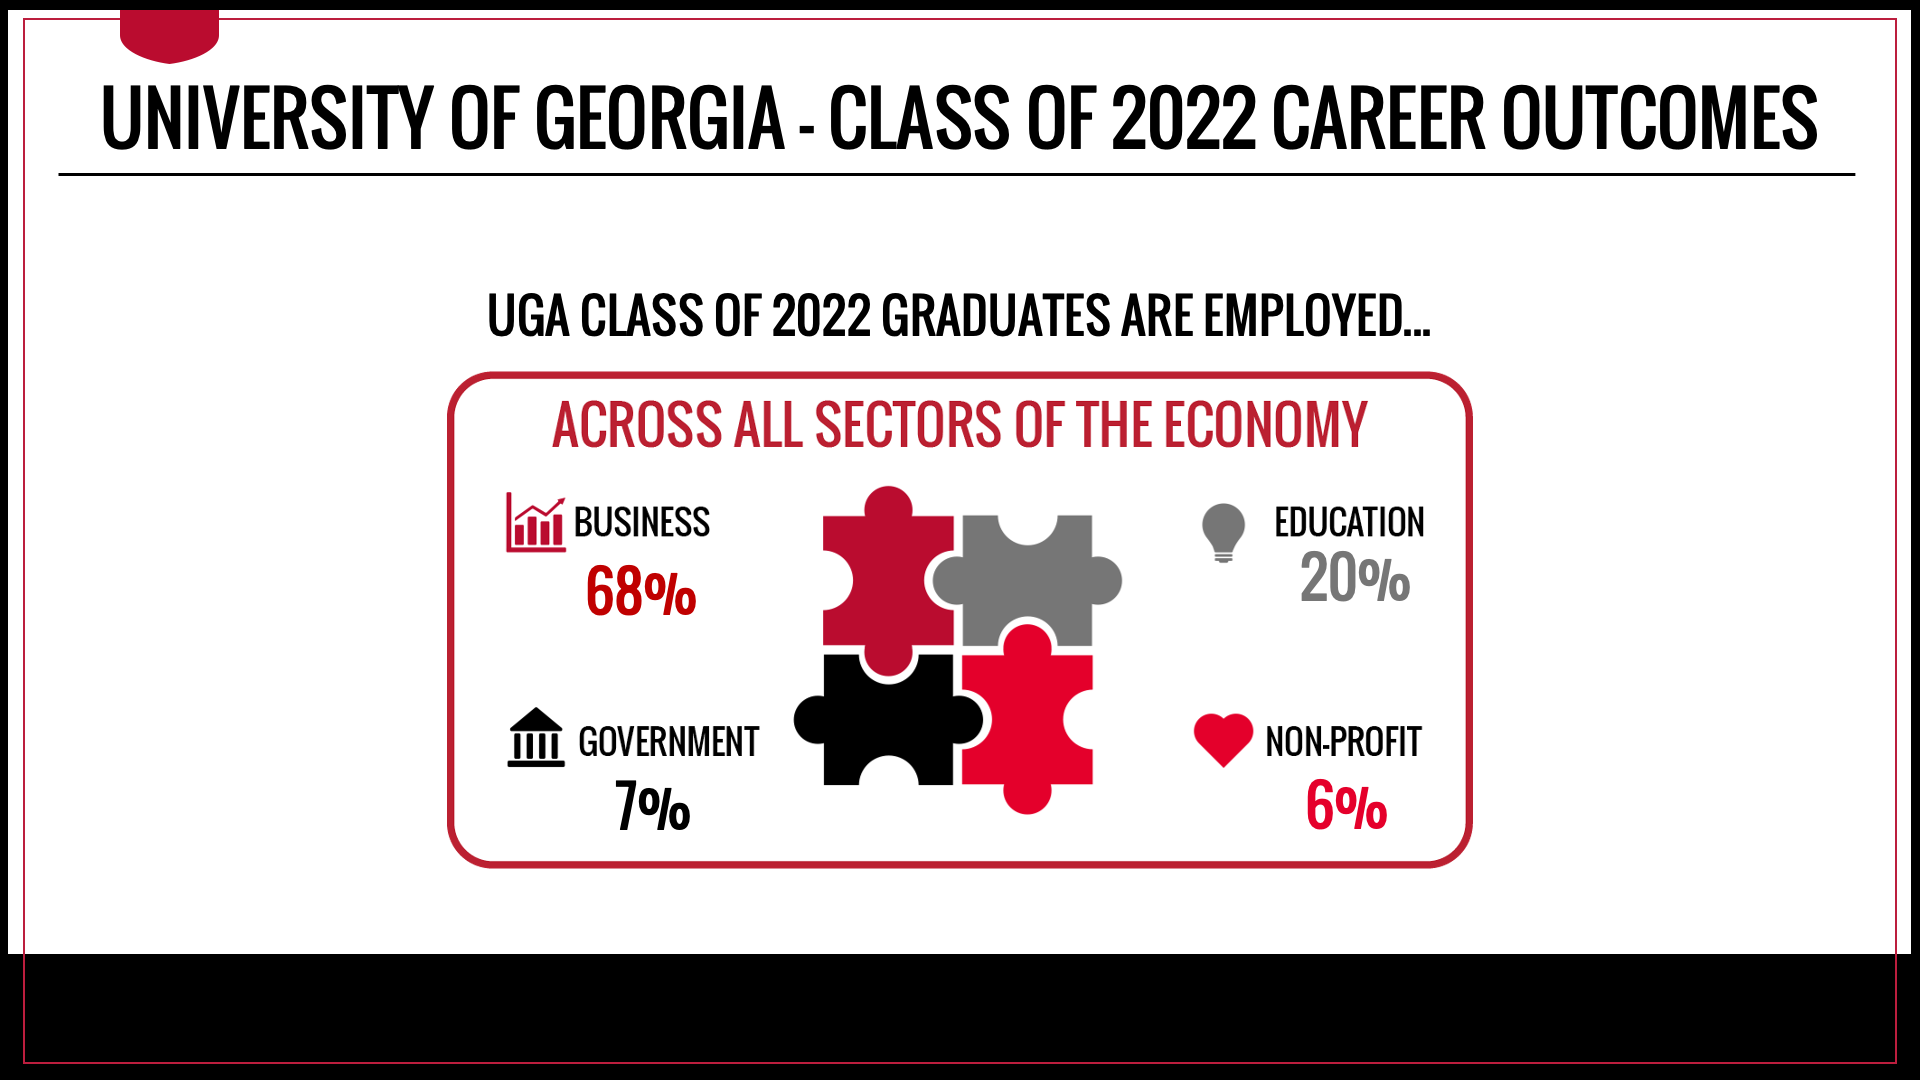 UGA Class of 2022 graduates are working across all sectors of the economy. 68 percent of full-time employed graduates are working in the business sector, 20 percent are working in the education sector, 7 percent are working in the government sector and 6 percent are working in the non-profit sector.